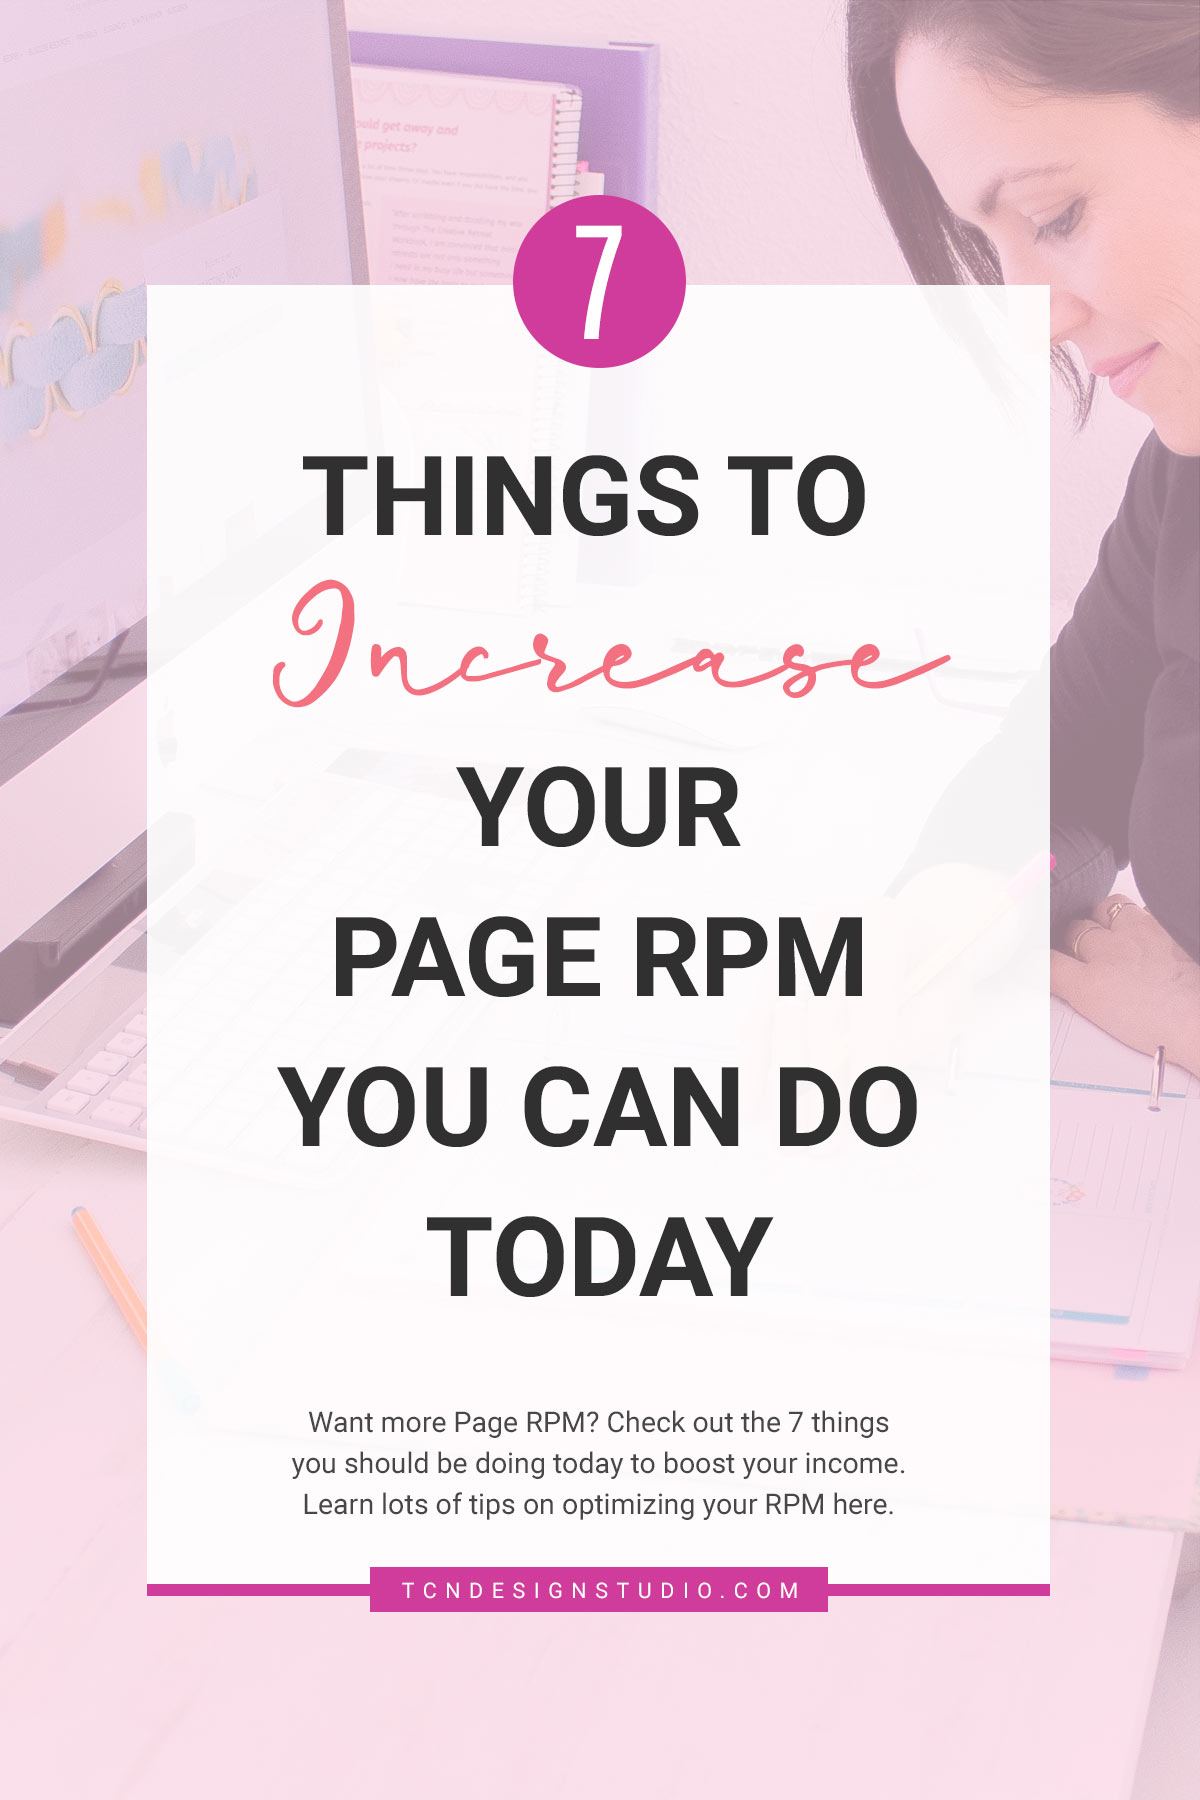 7 Things to increase your Page RPM You can do today Cover image with title overlay over photo and light purple faded color